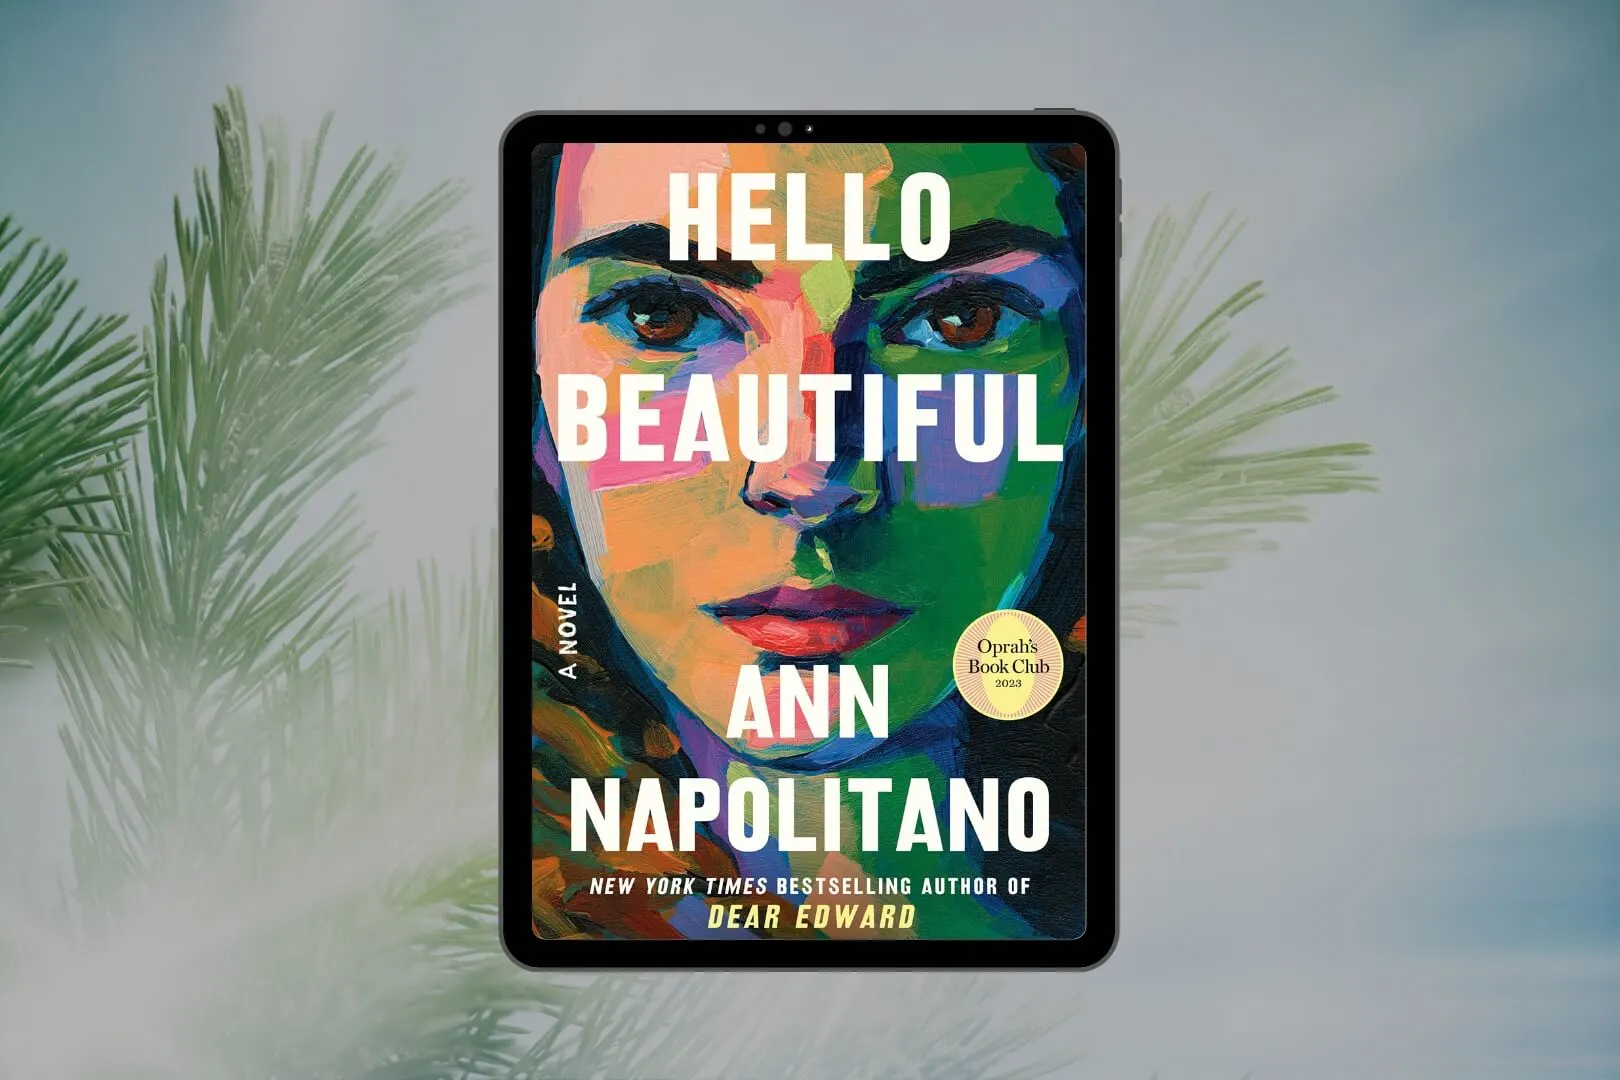 book review hello beautiful